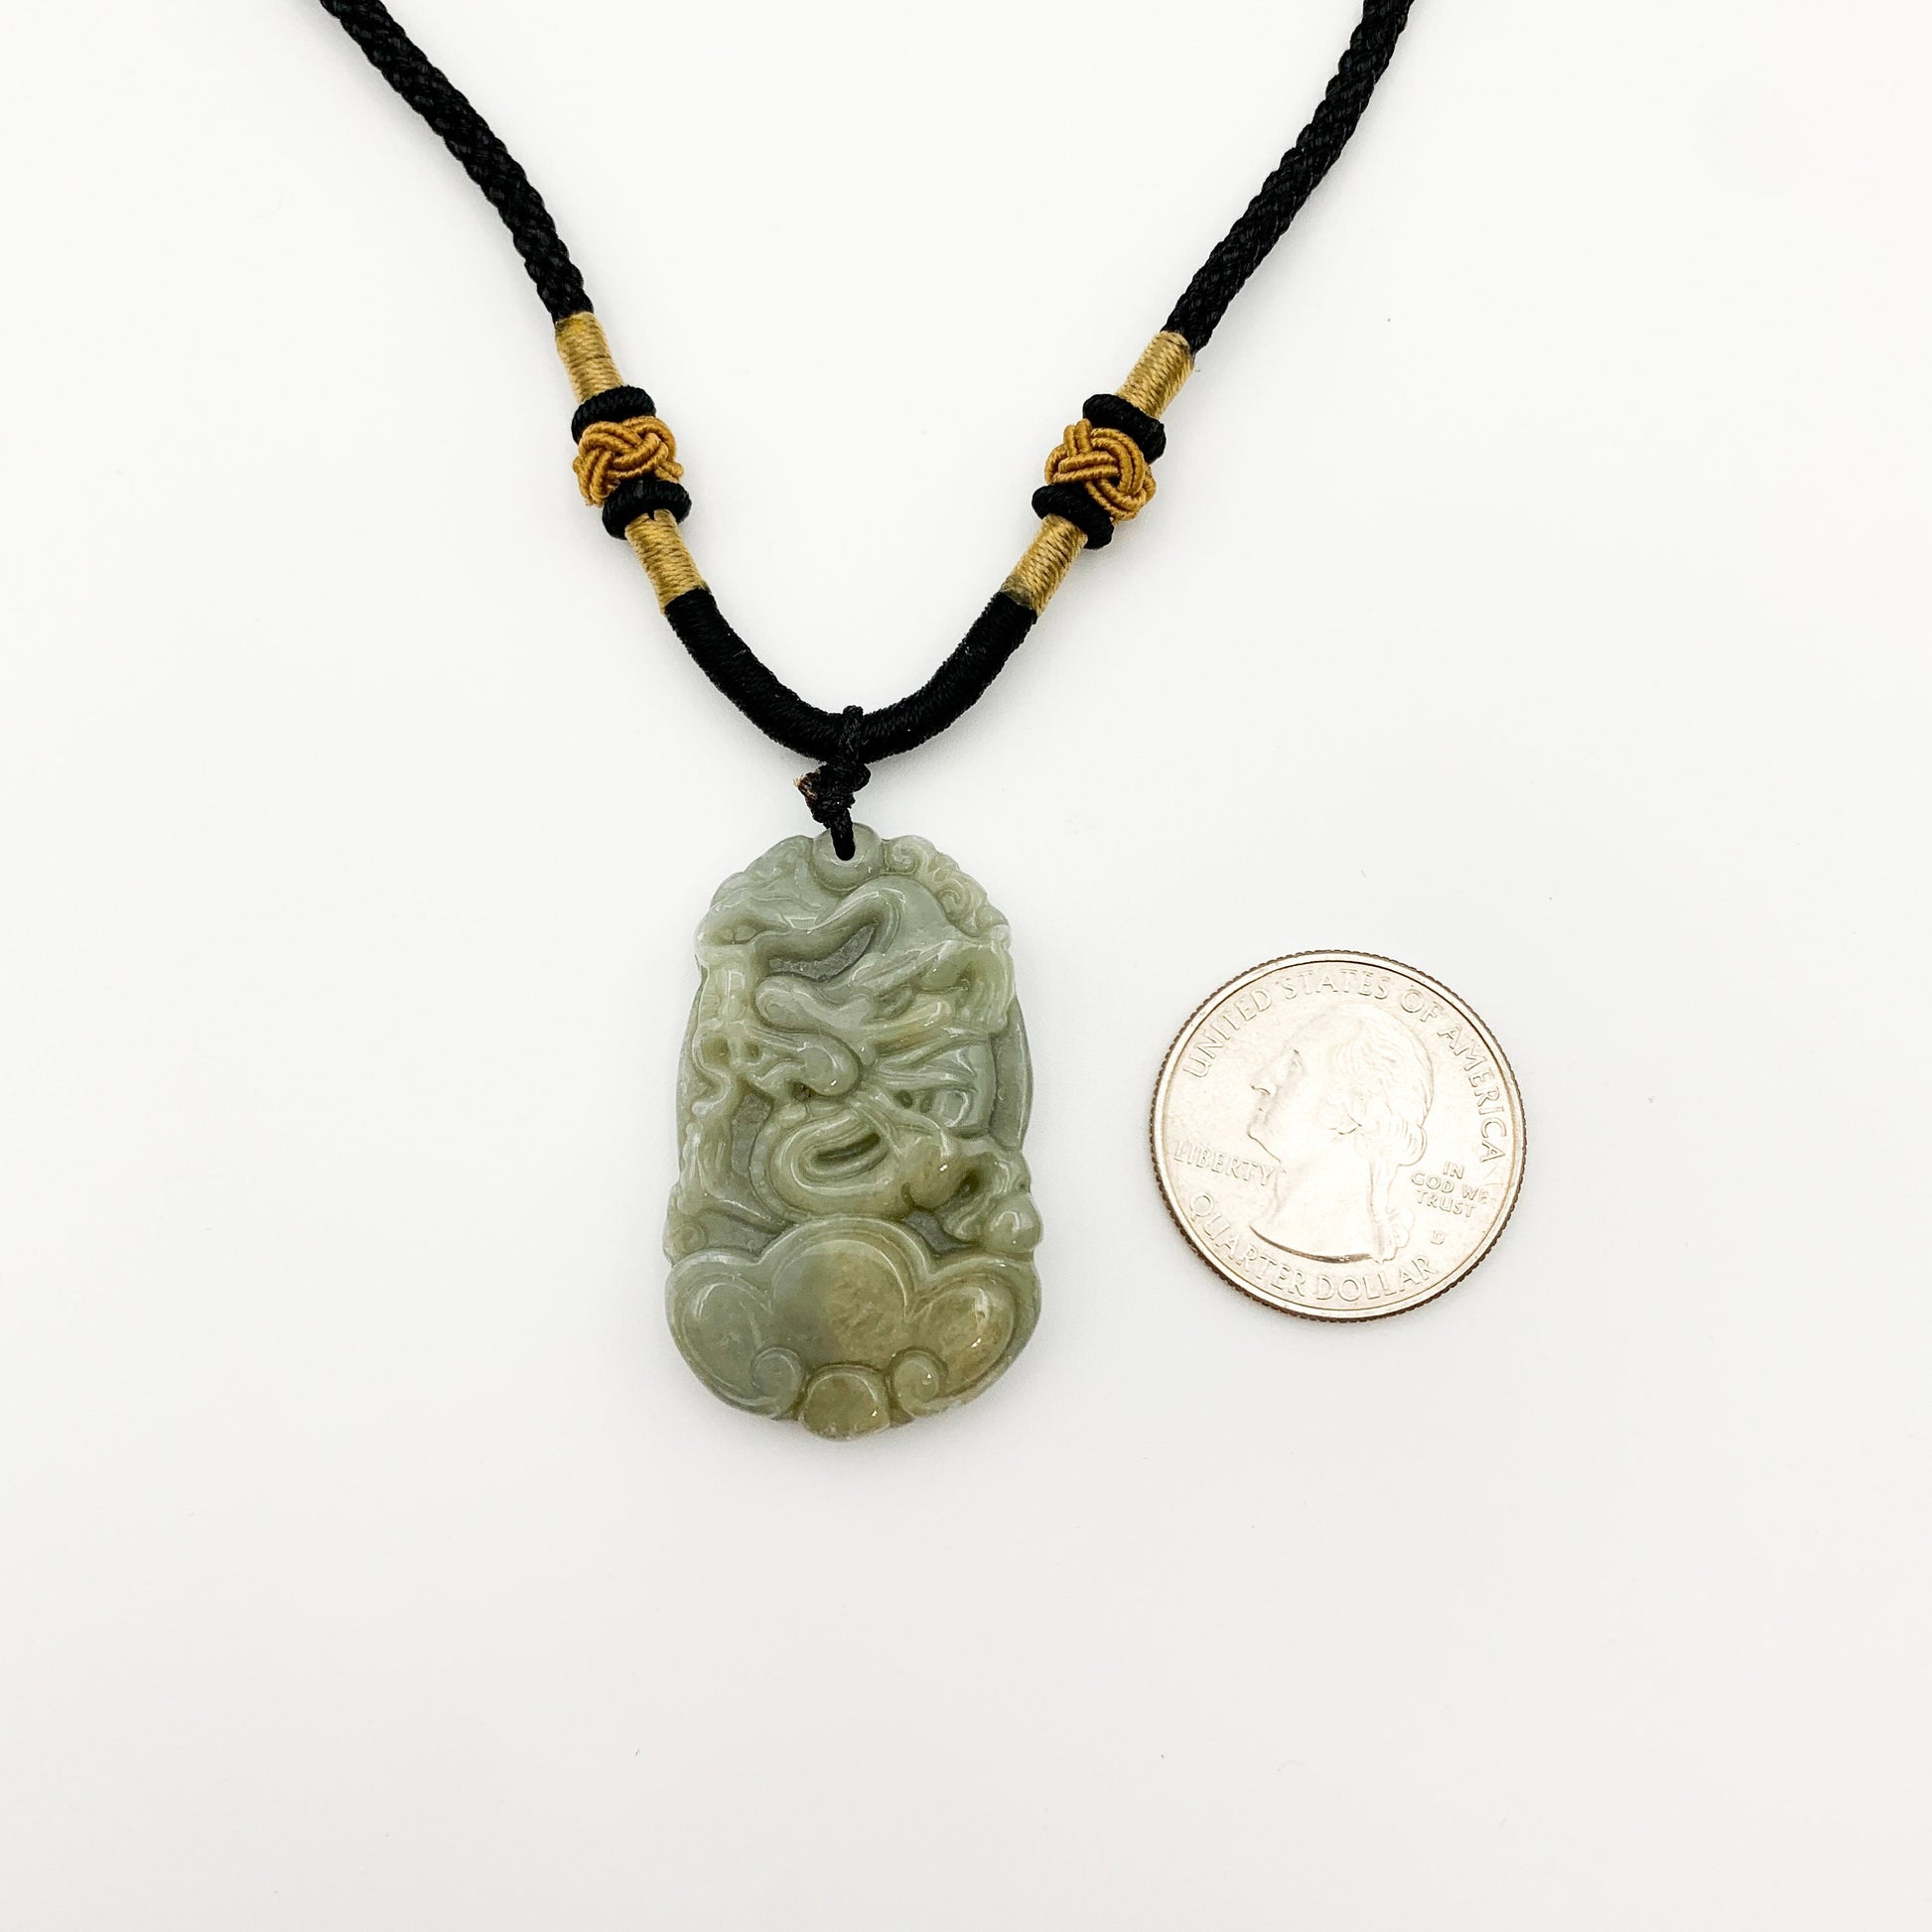 Jadeite Jade Dragon Chinese Zodiac Carved Pendant Necklace, YW-0110-1646113683 - AriaDesignCollection